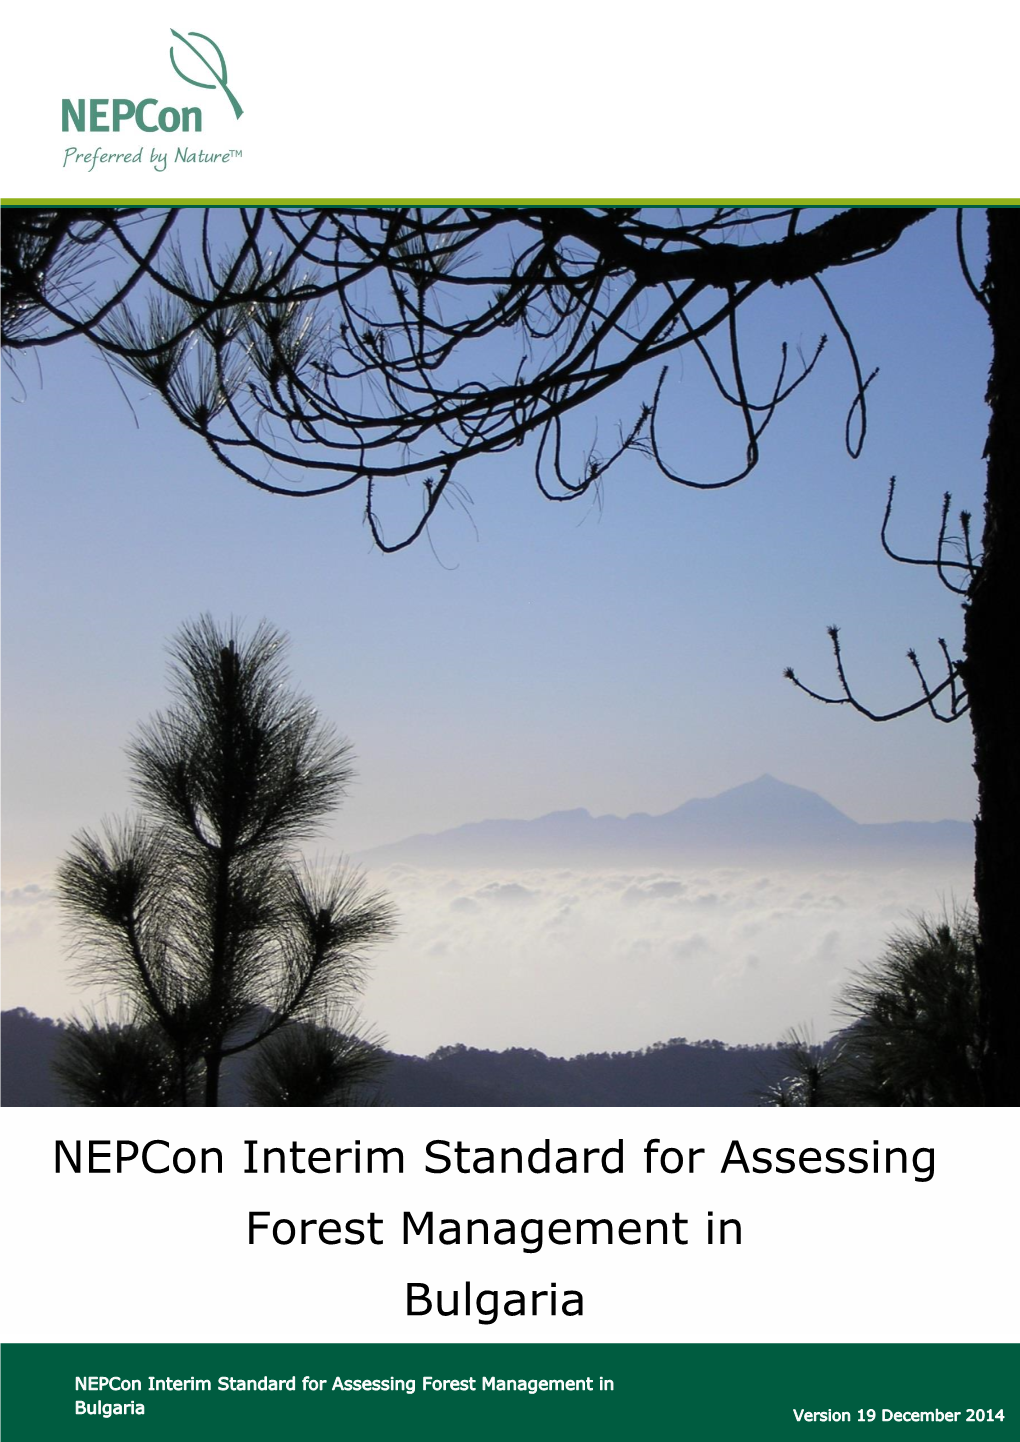 Nepcon Interim Standard for Assessing Forest Management in Bulgaria